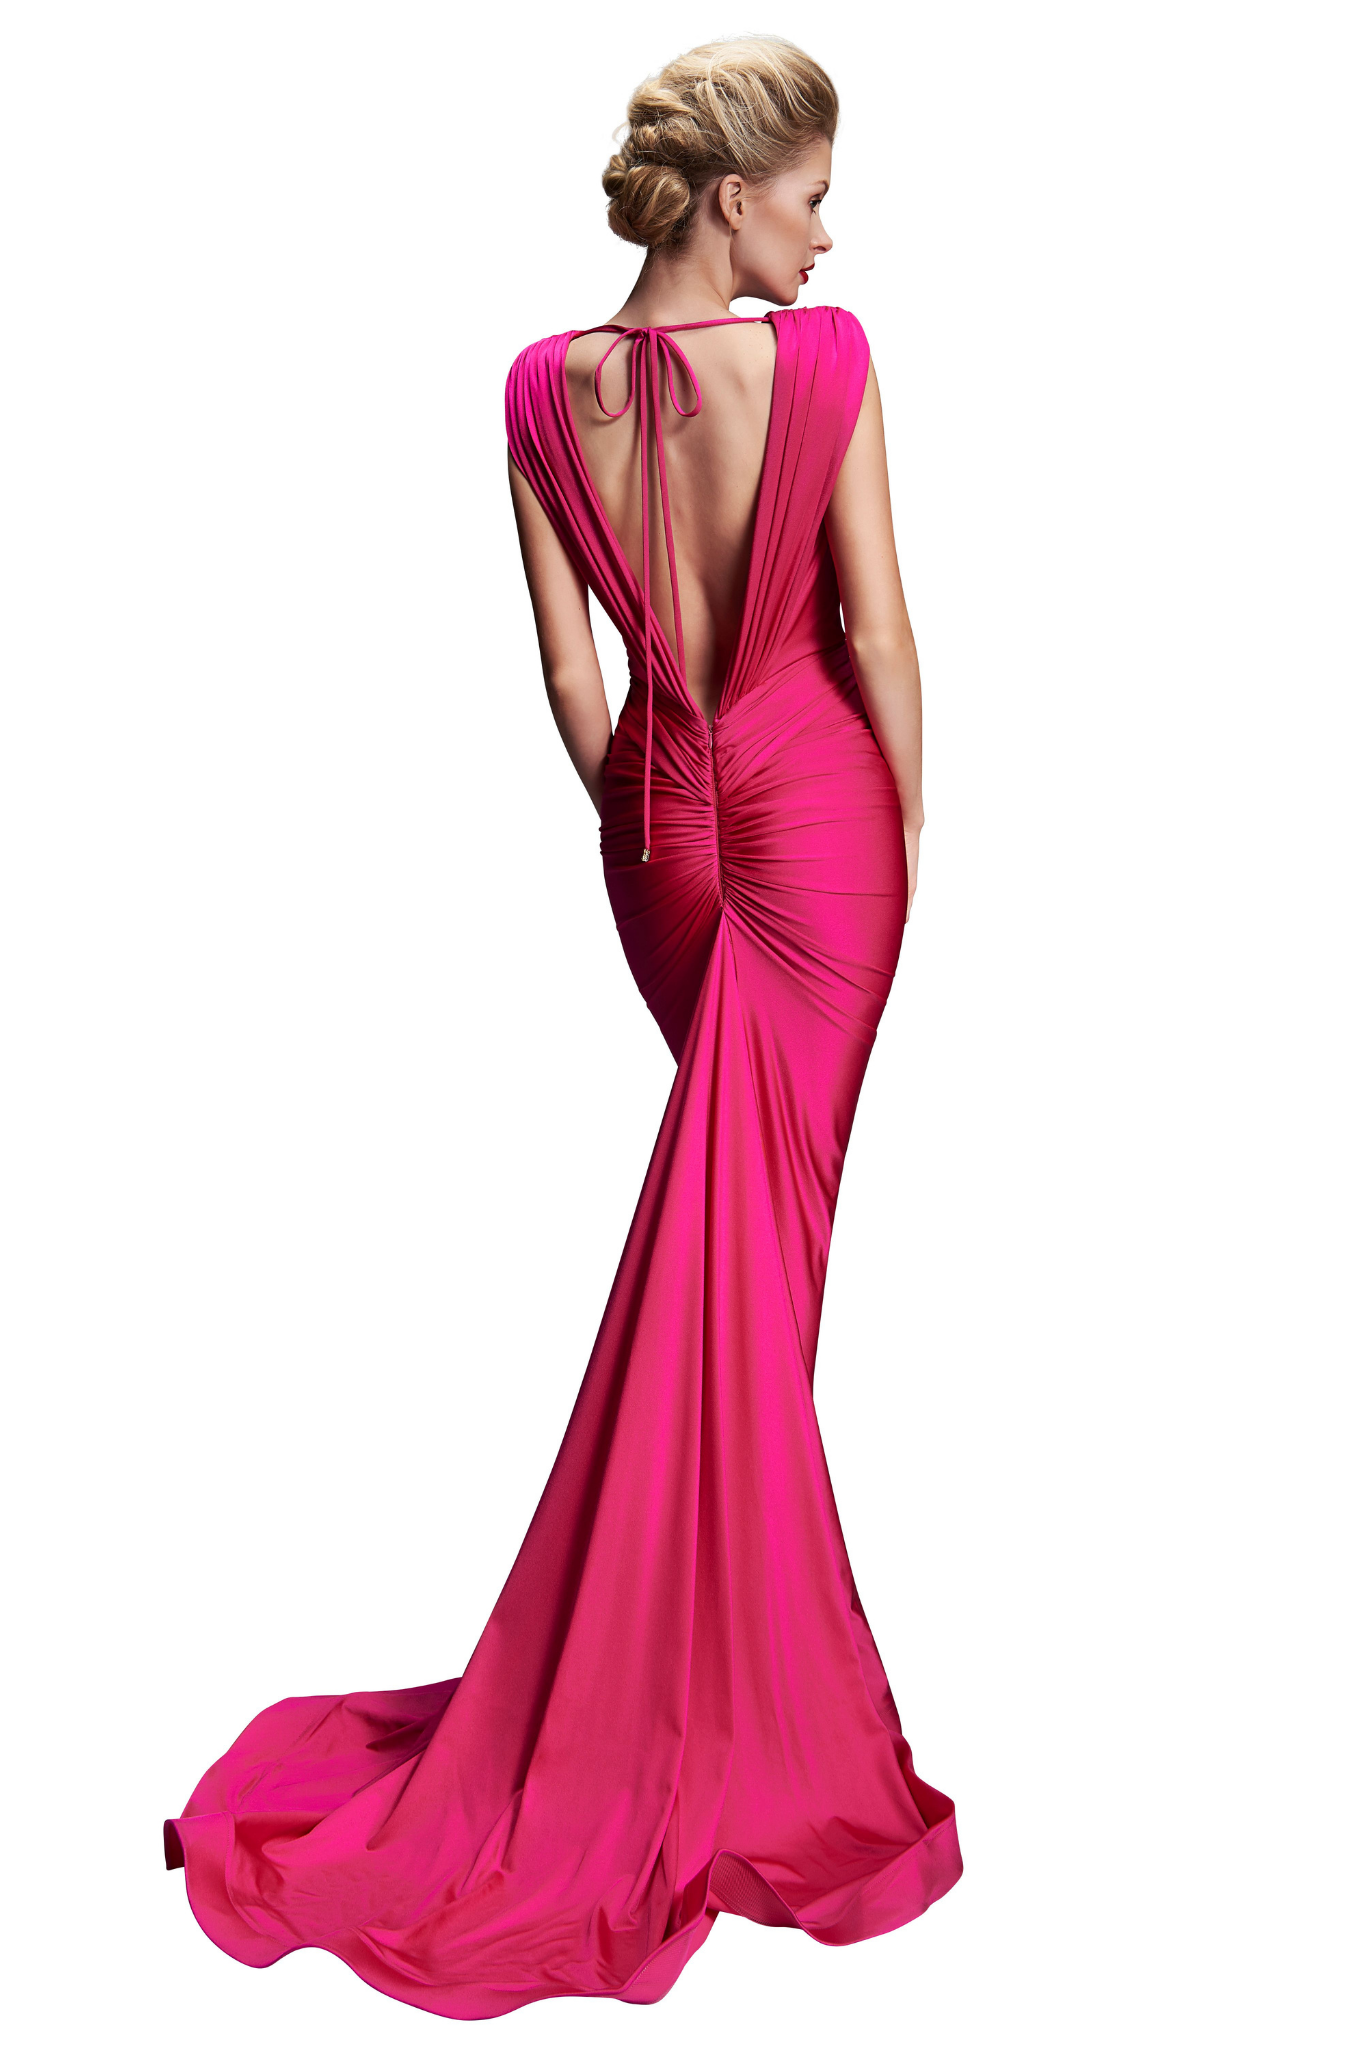 Model wearing a rose evening gown